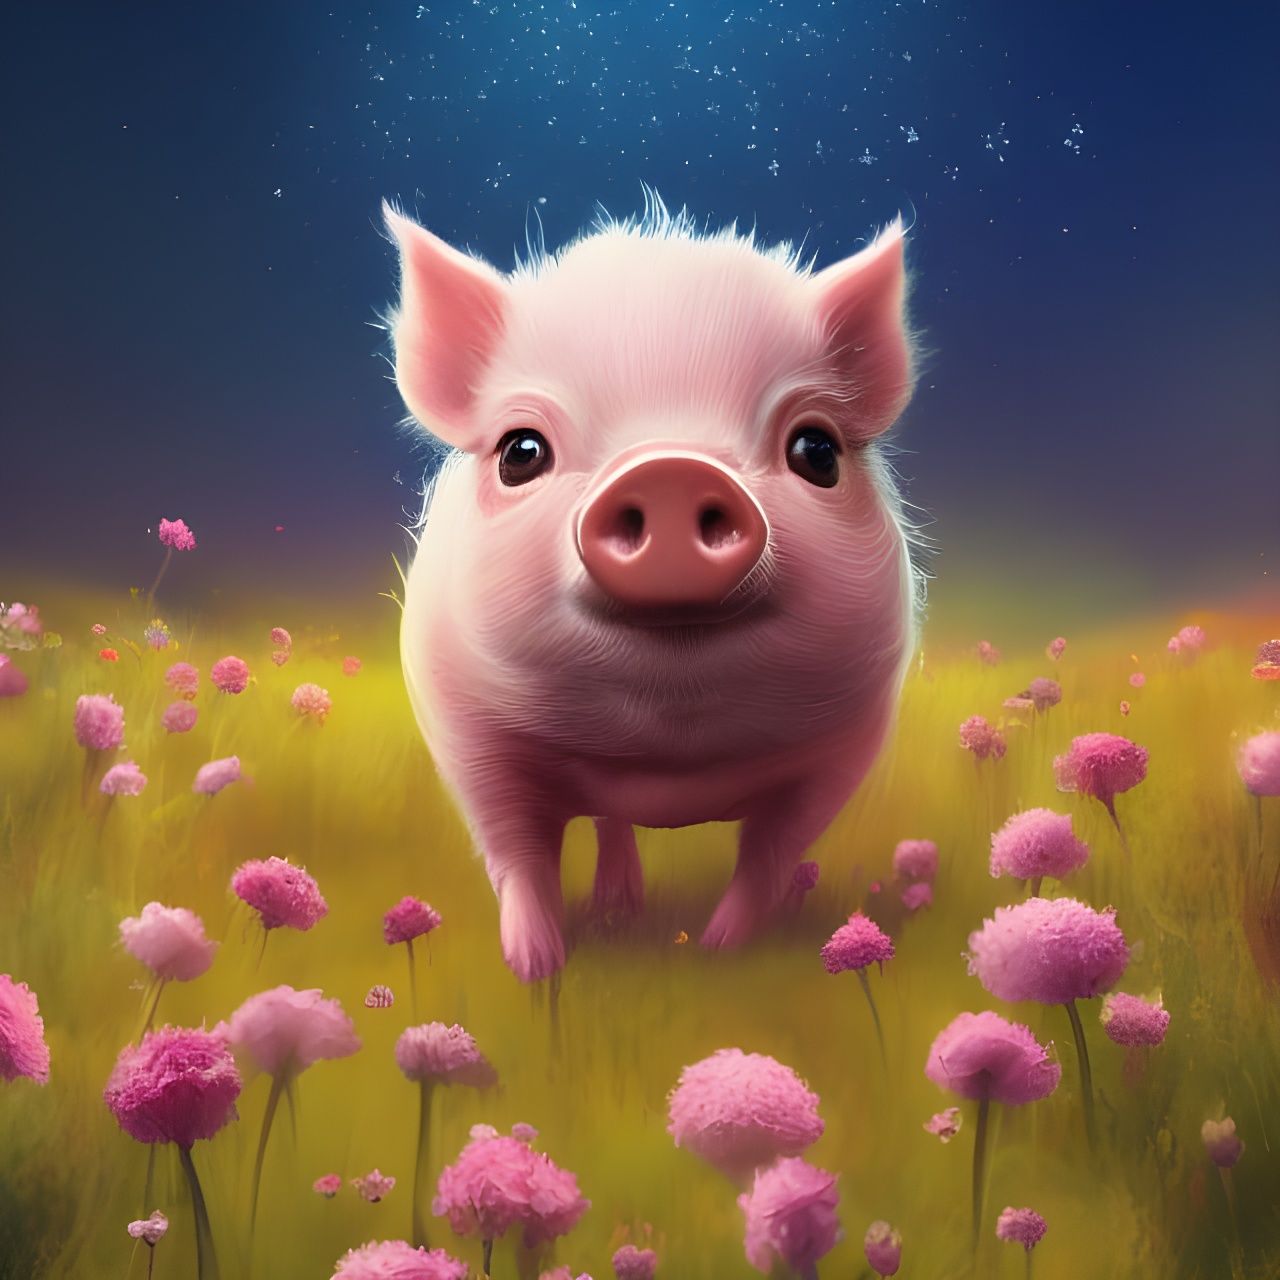 Cute Pig Wallpaper Vector Images over 1600